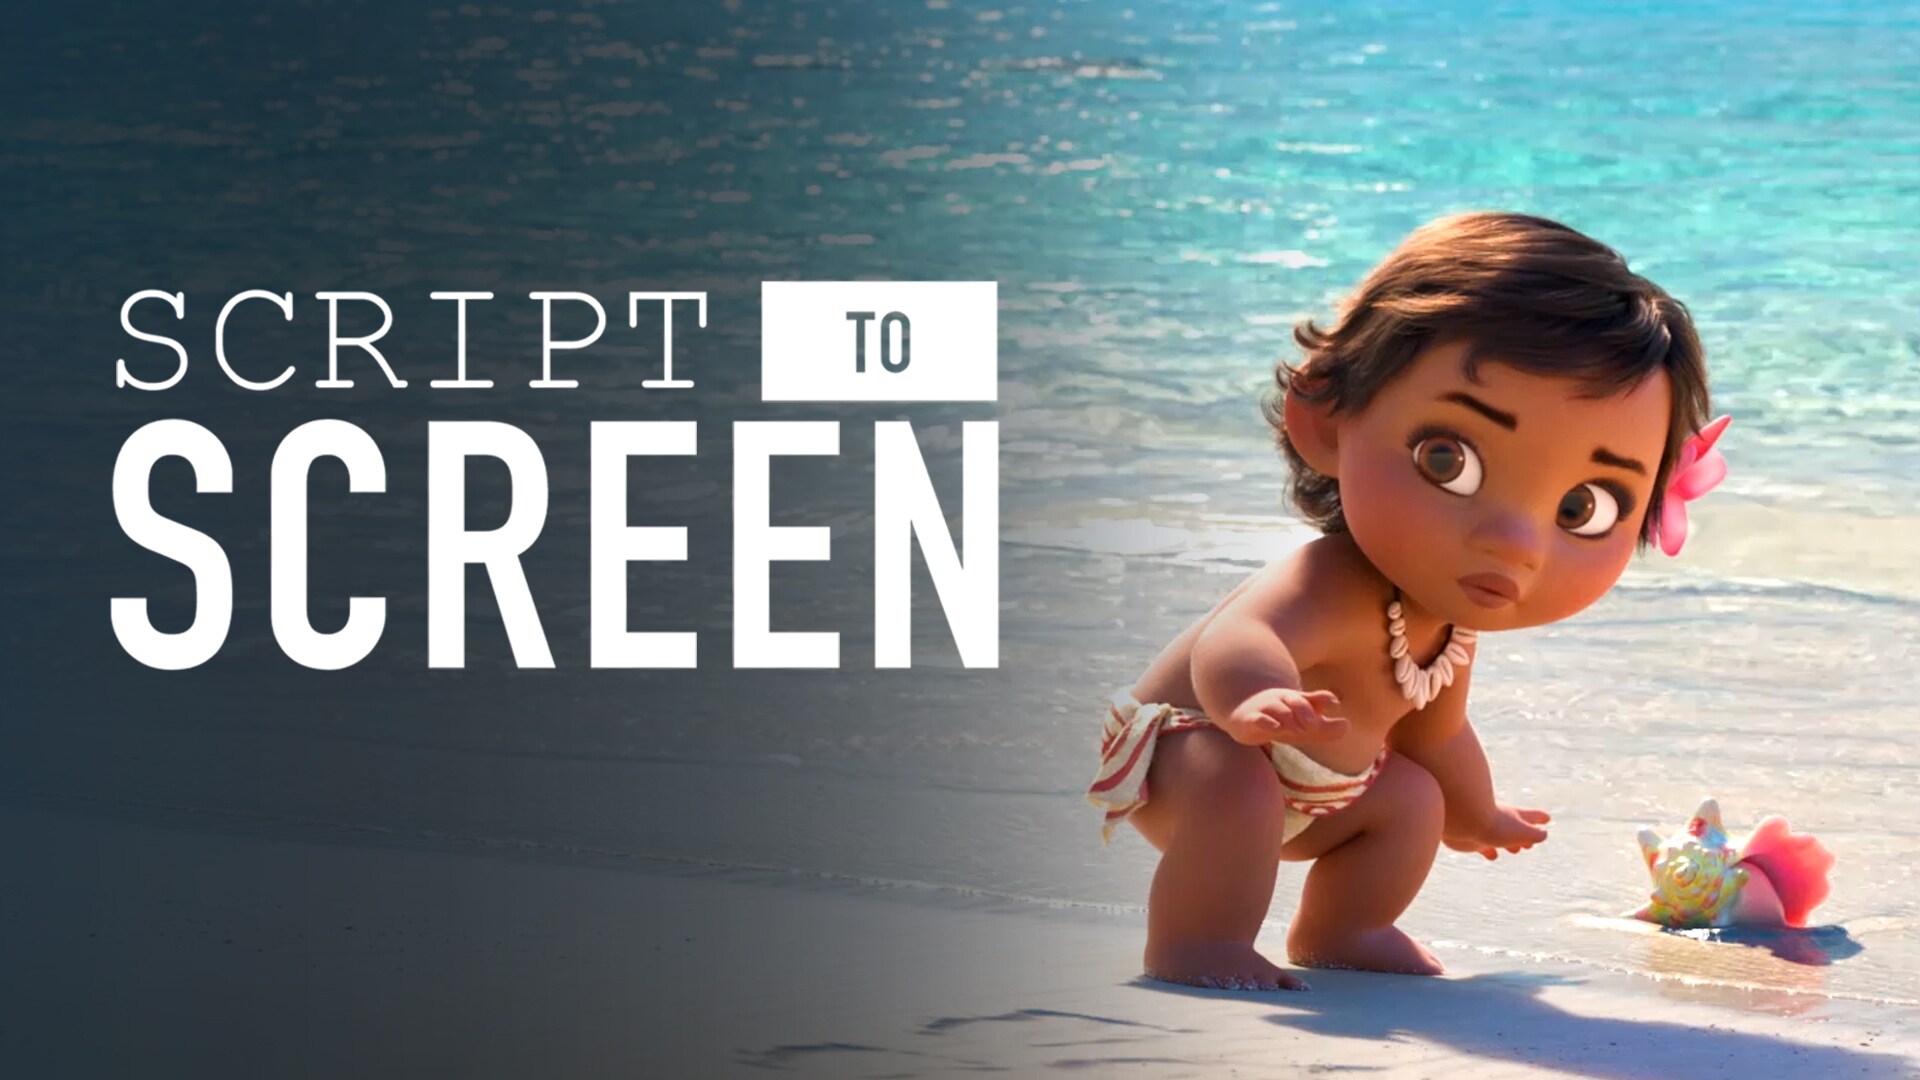 Baby Moana Meets the Ocean | Script to Screen by Disney